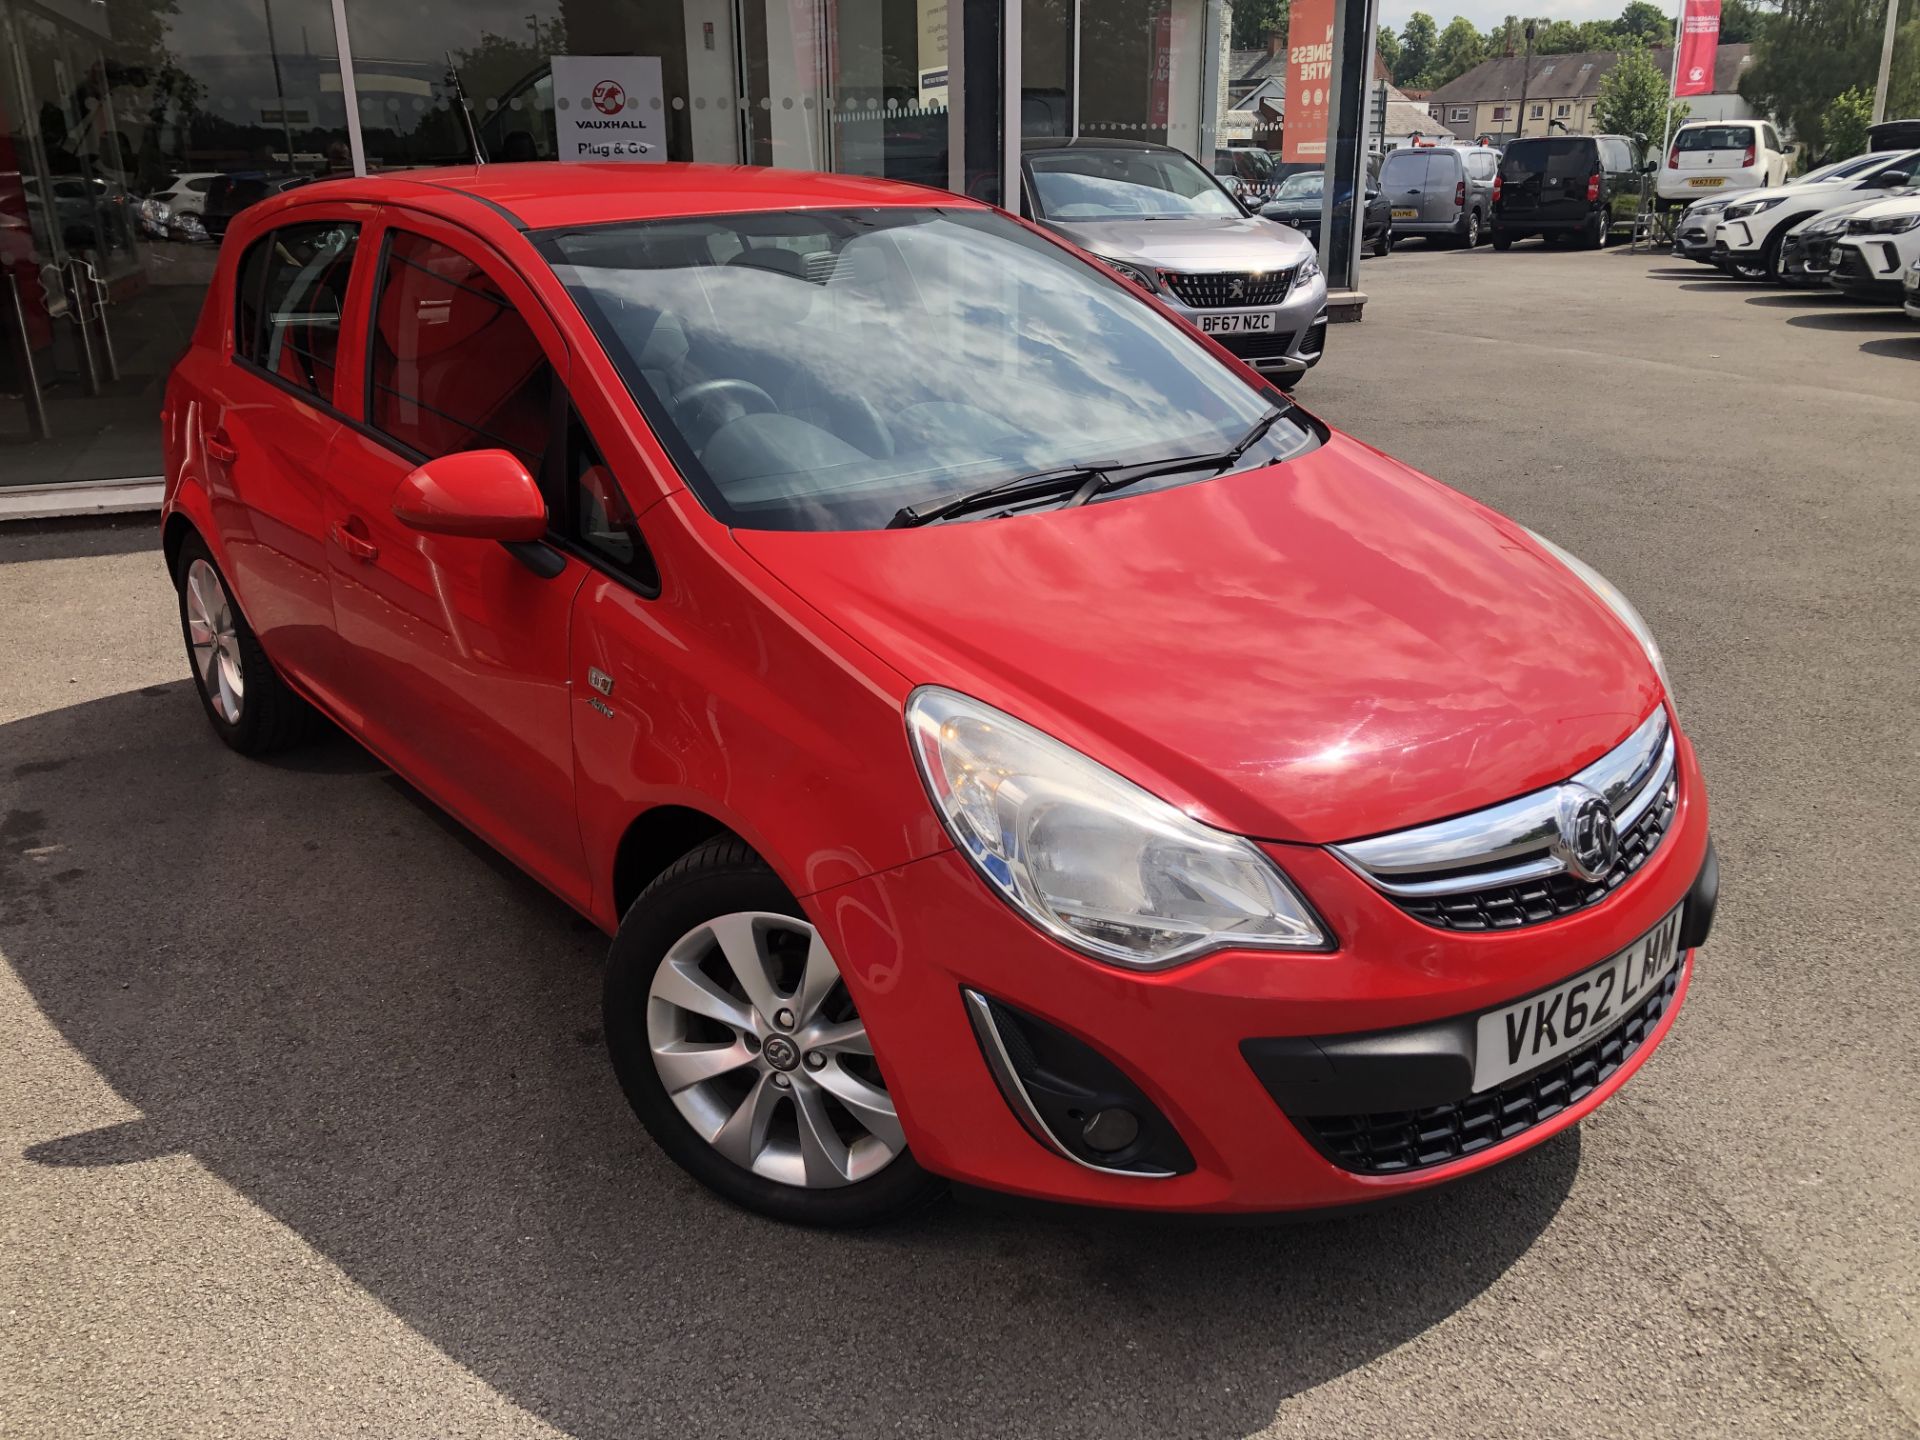 Vauxhall Corsa 1.2i (85ps) Active 5dr Air Con, Registration: VK62LMM, Date First Registered: 29/09/